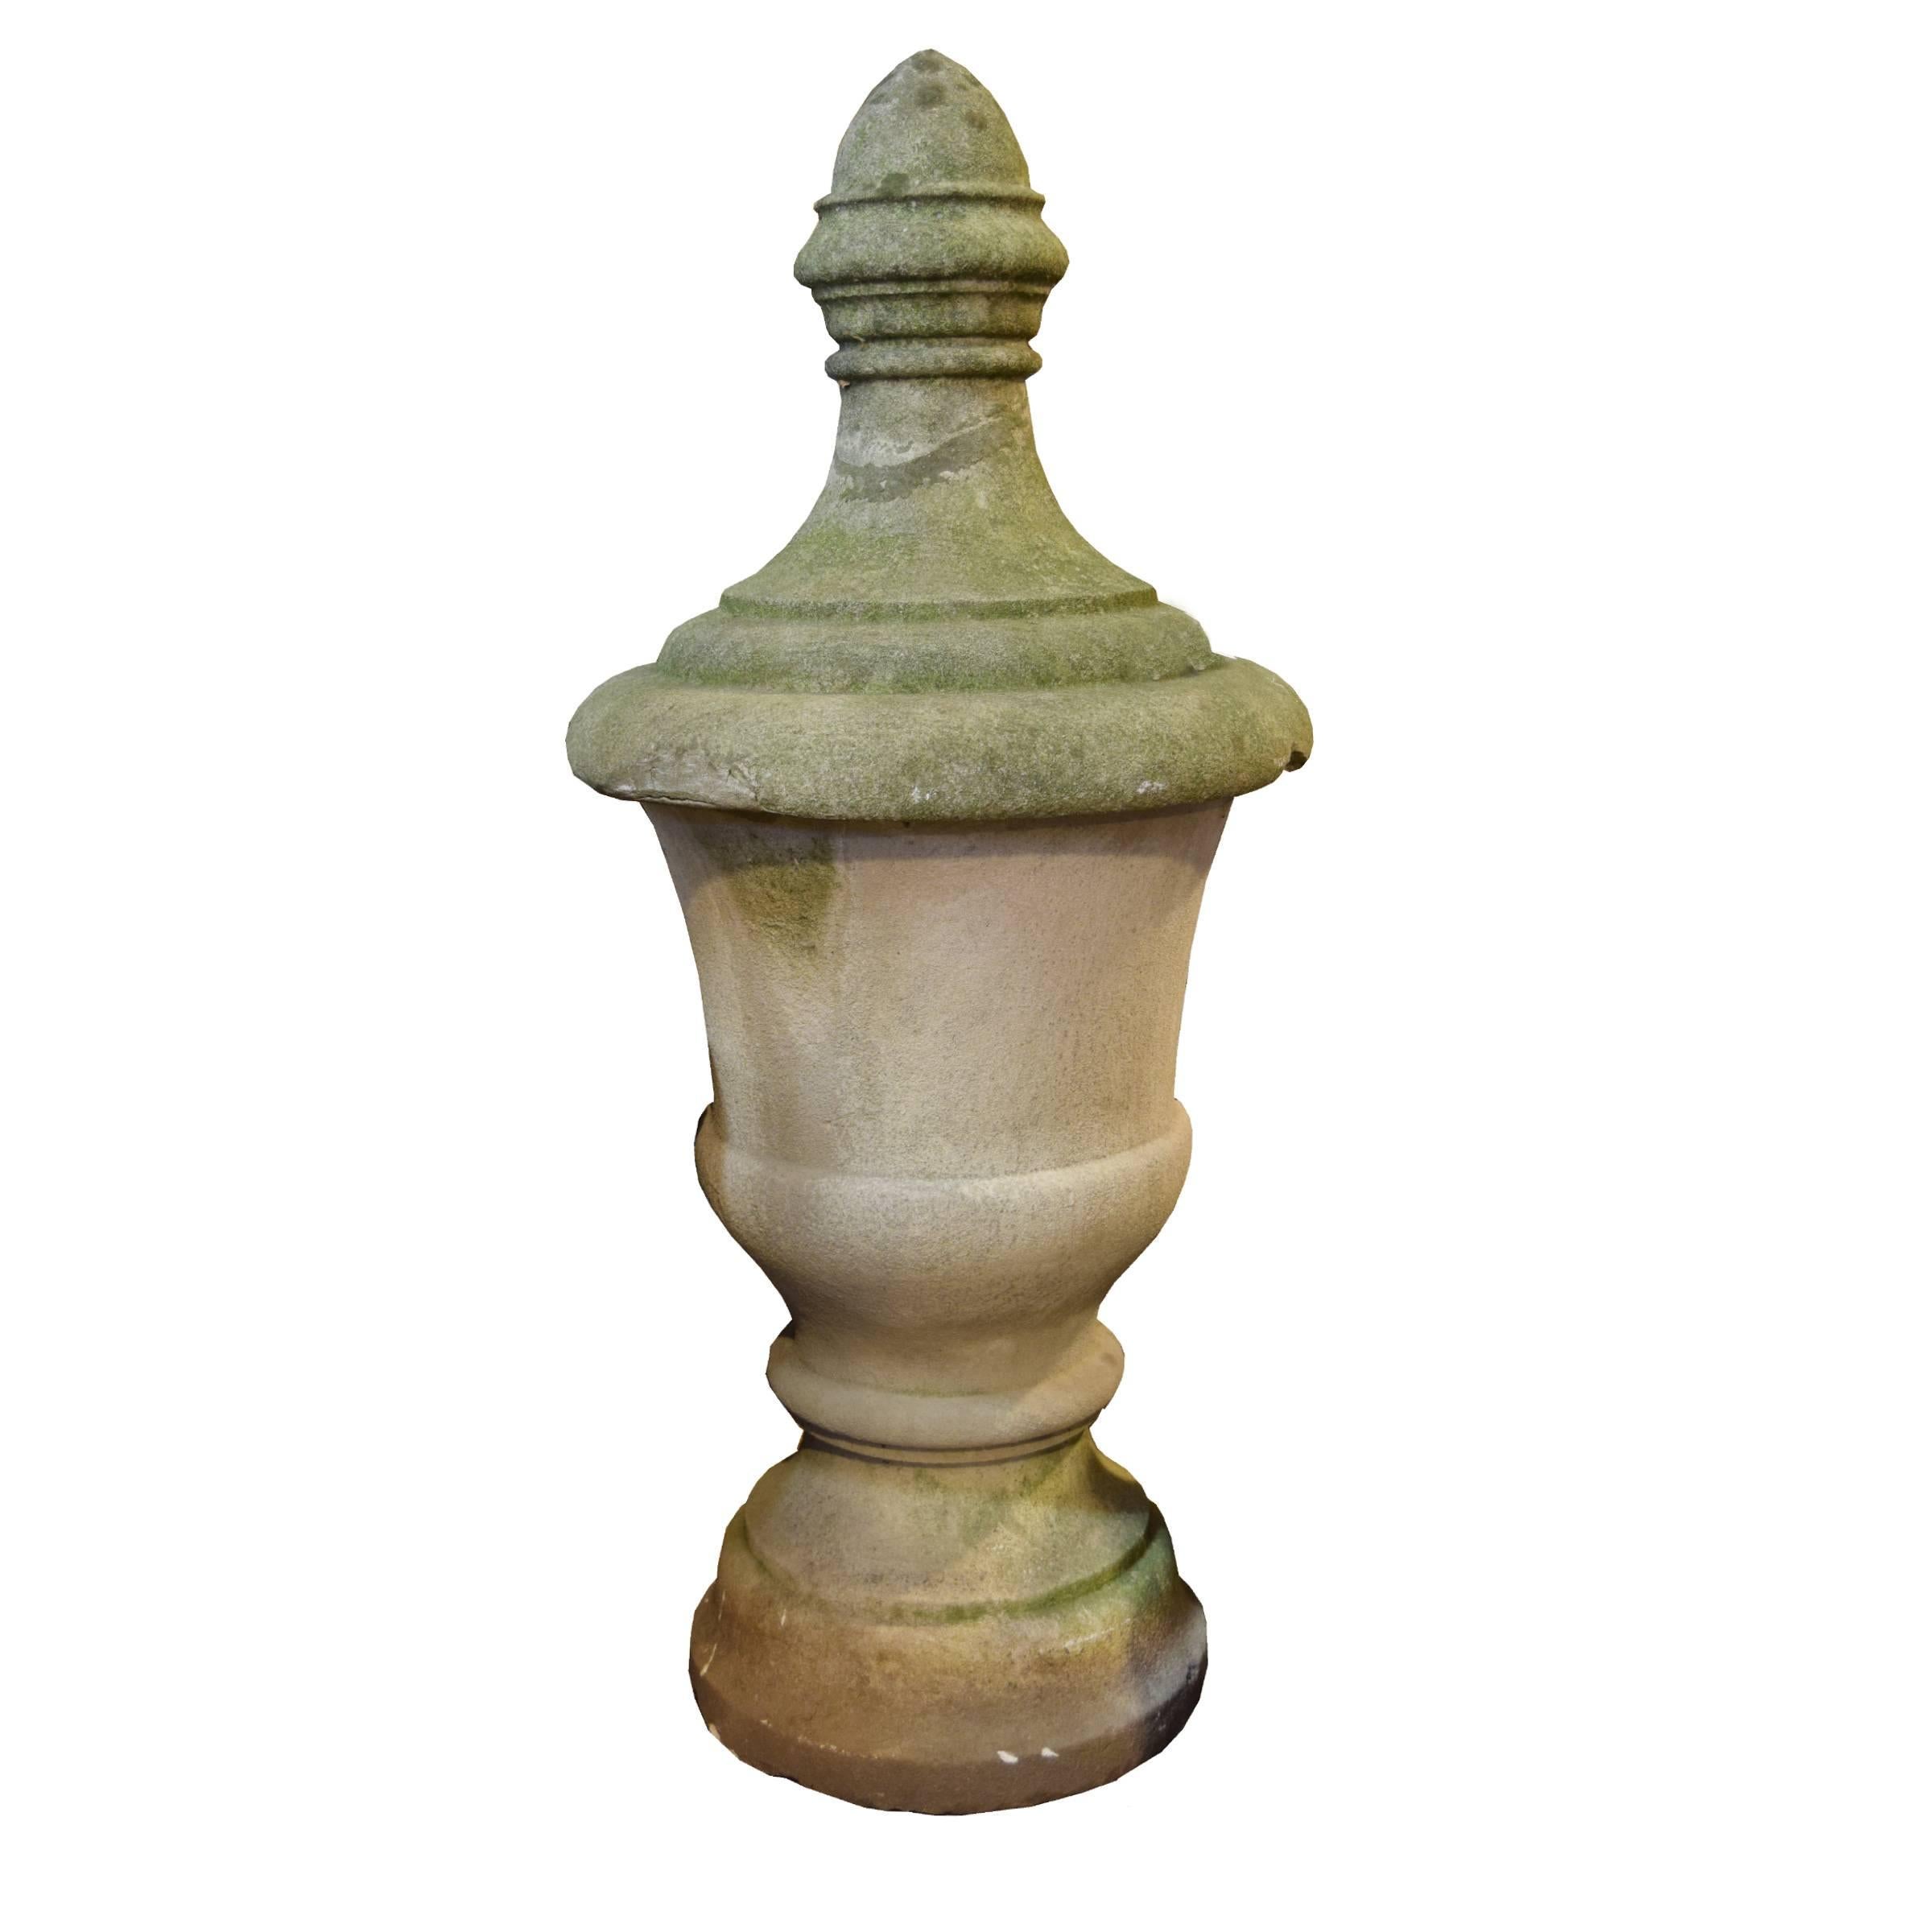 A pair of American carved limestone building finials with a great mossy patina.